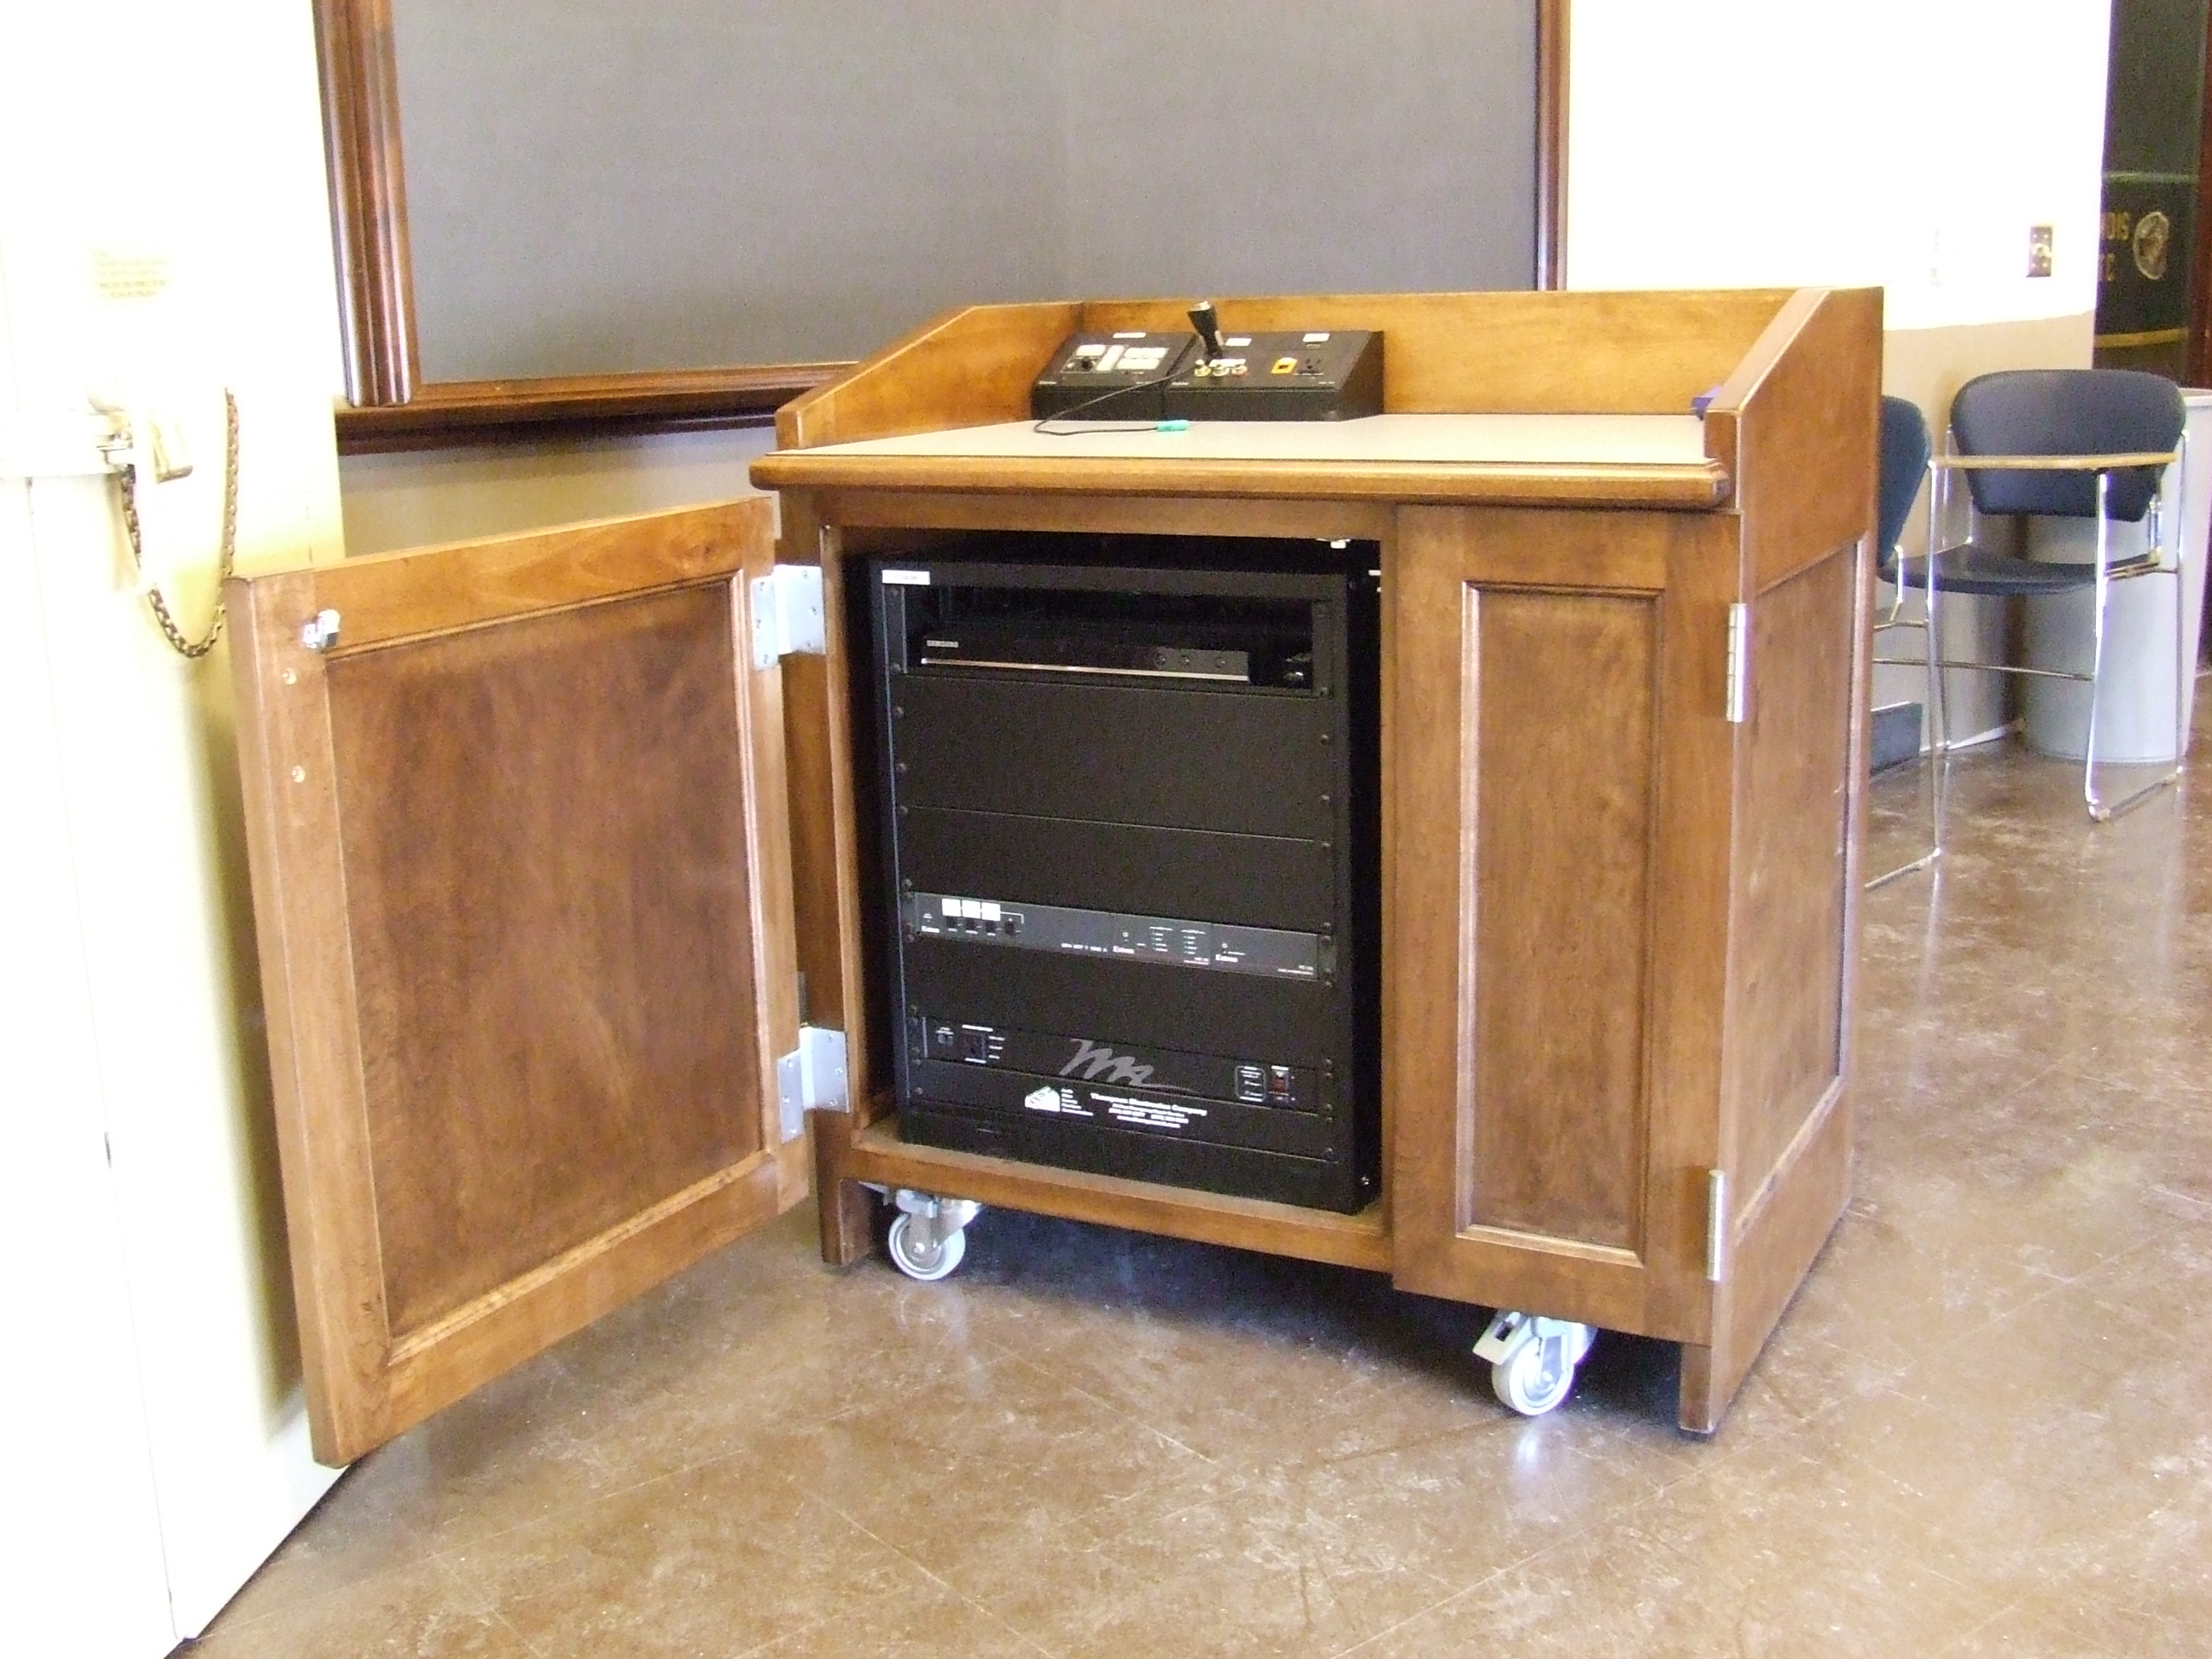 A view of the open cabinet with HDMI inputs, a push button controller, and audio visual rack.